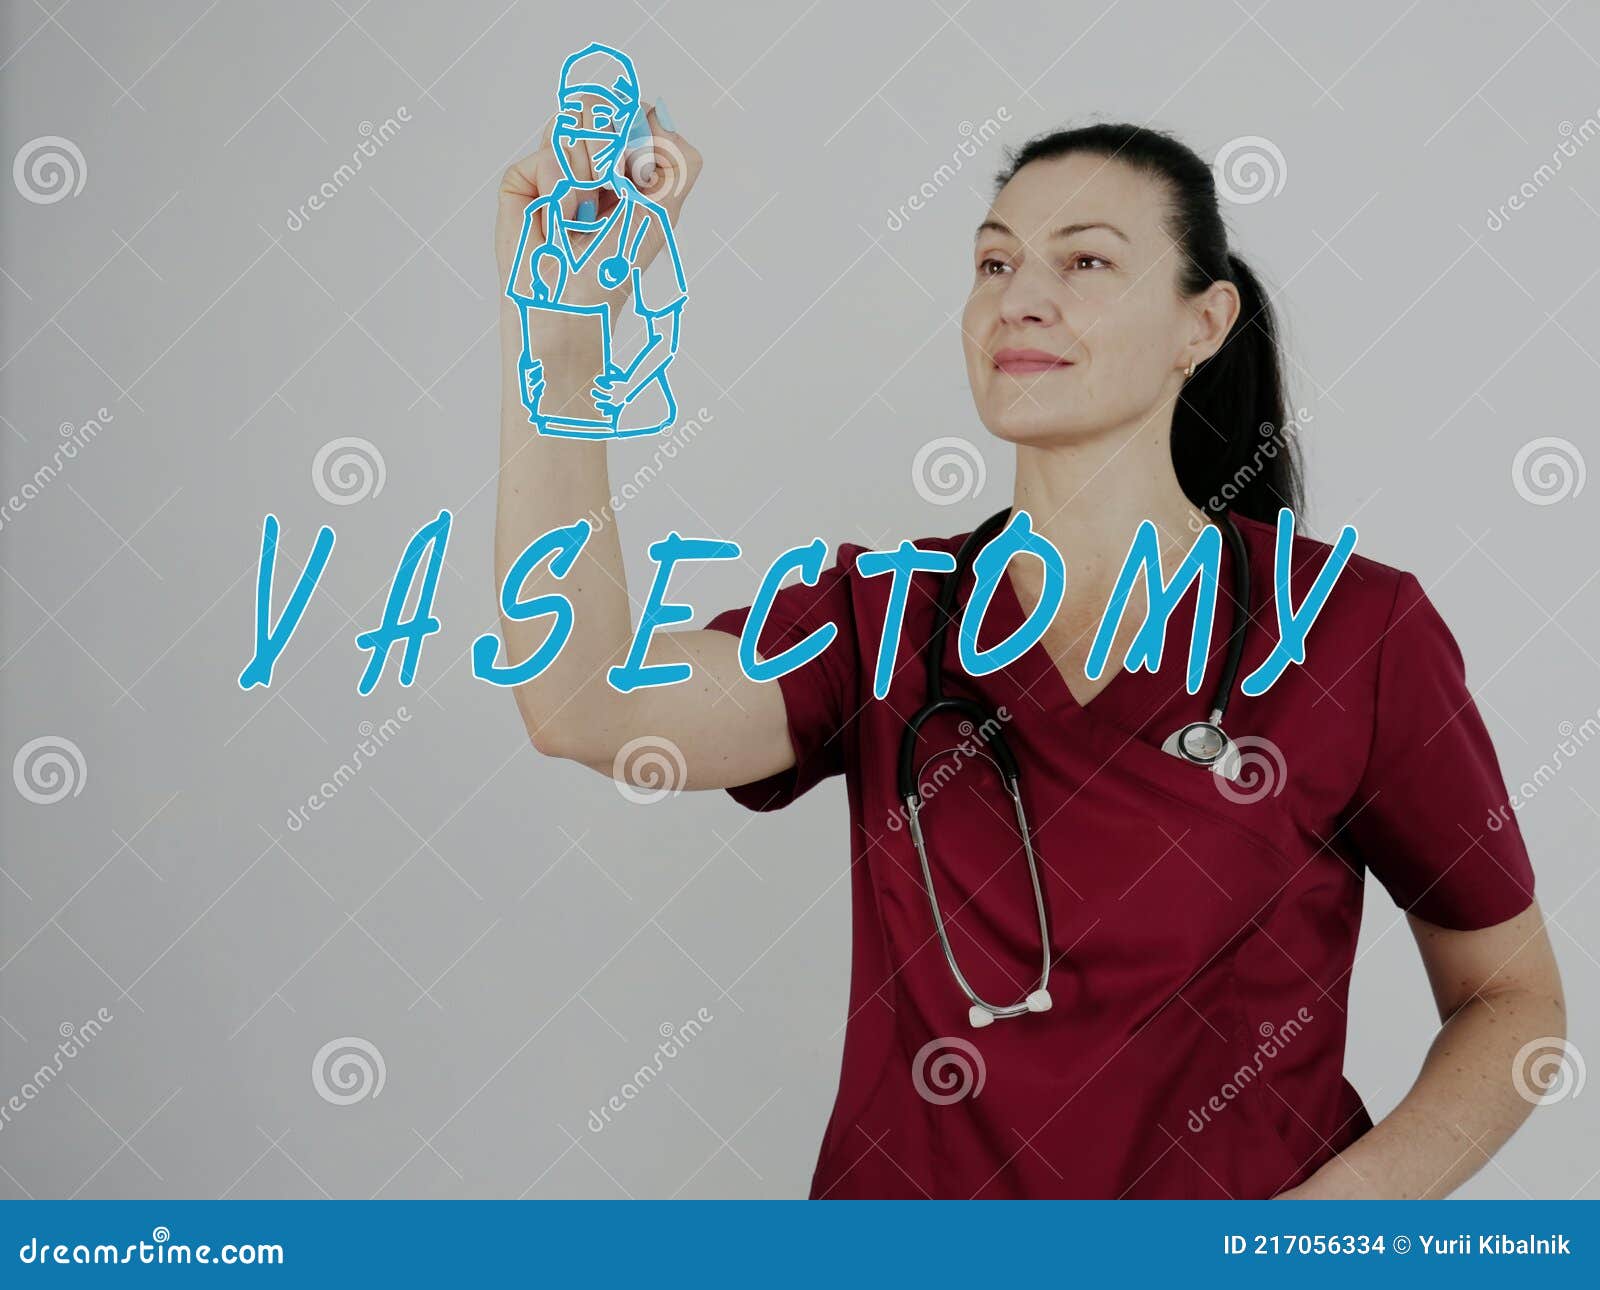 attractive medico with marker writing vasectomy